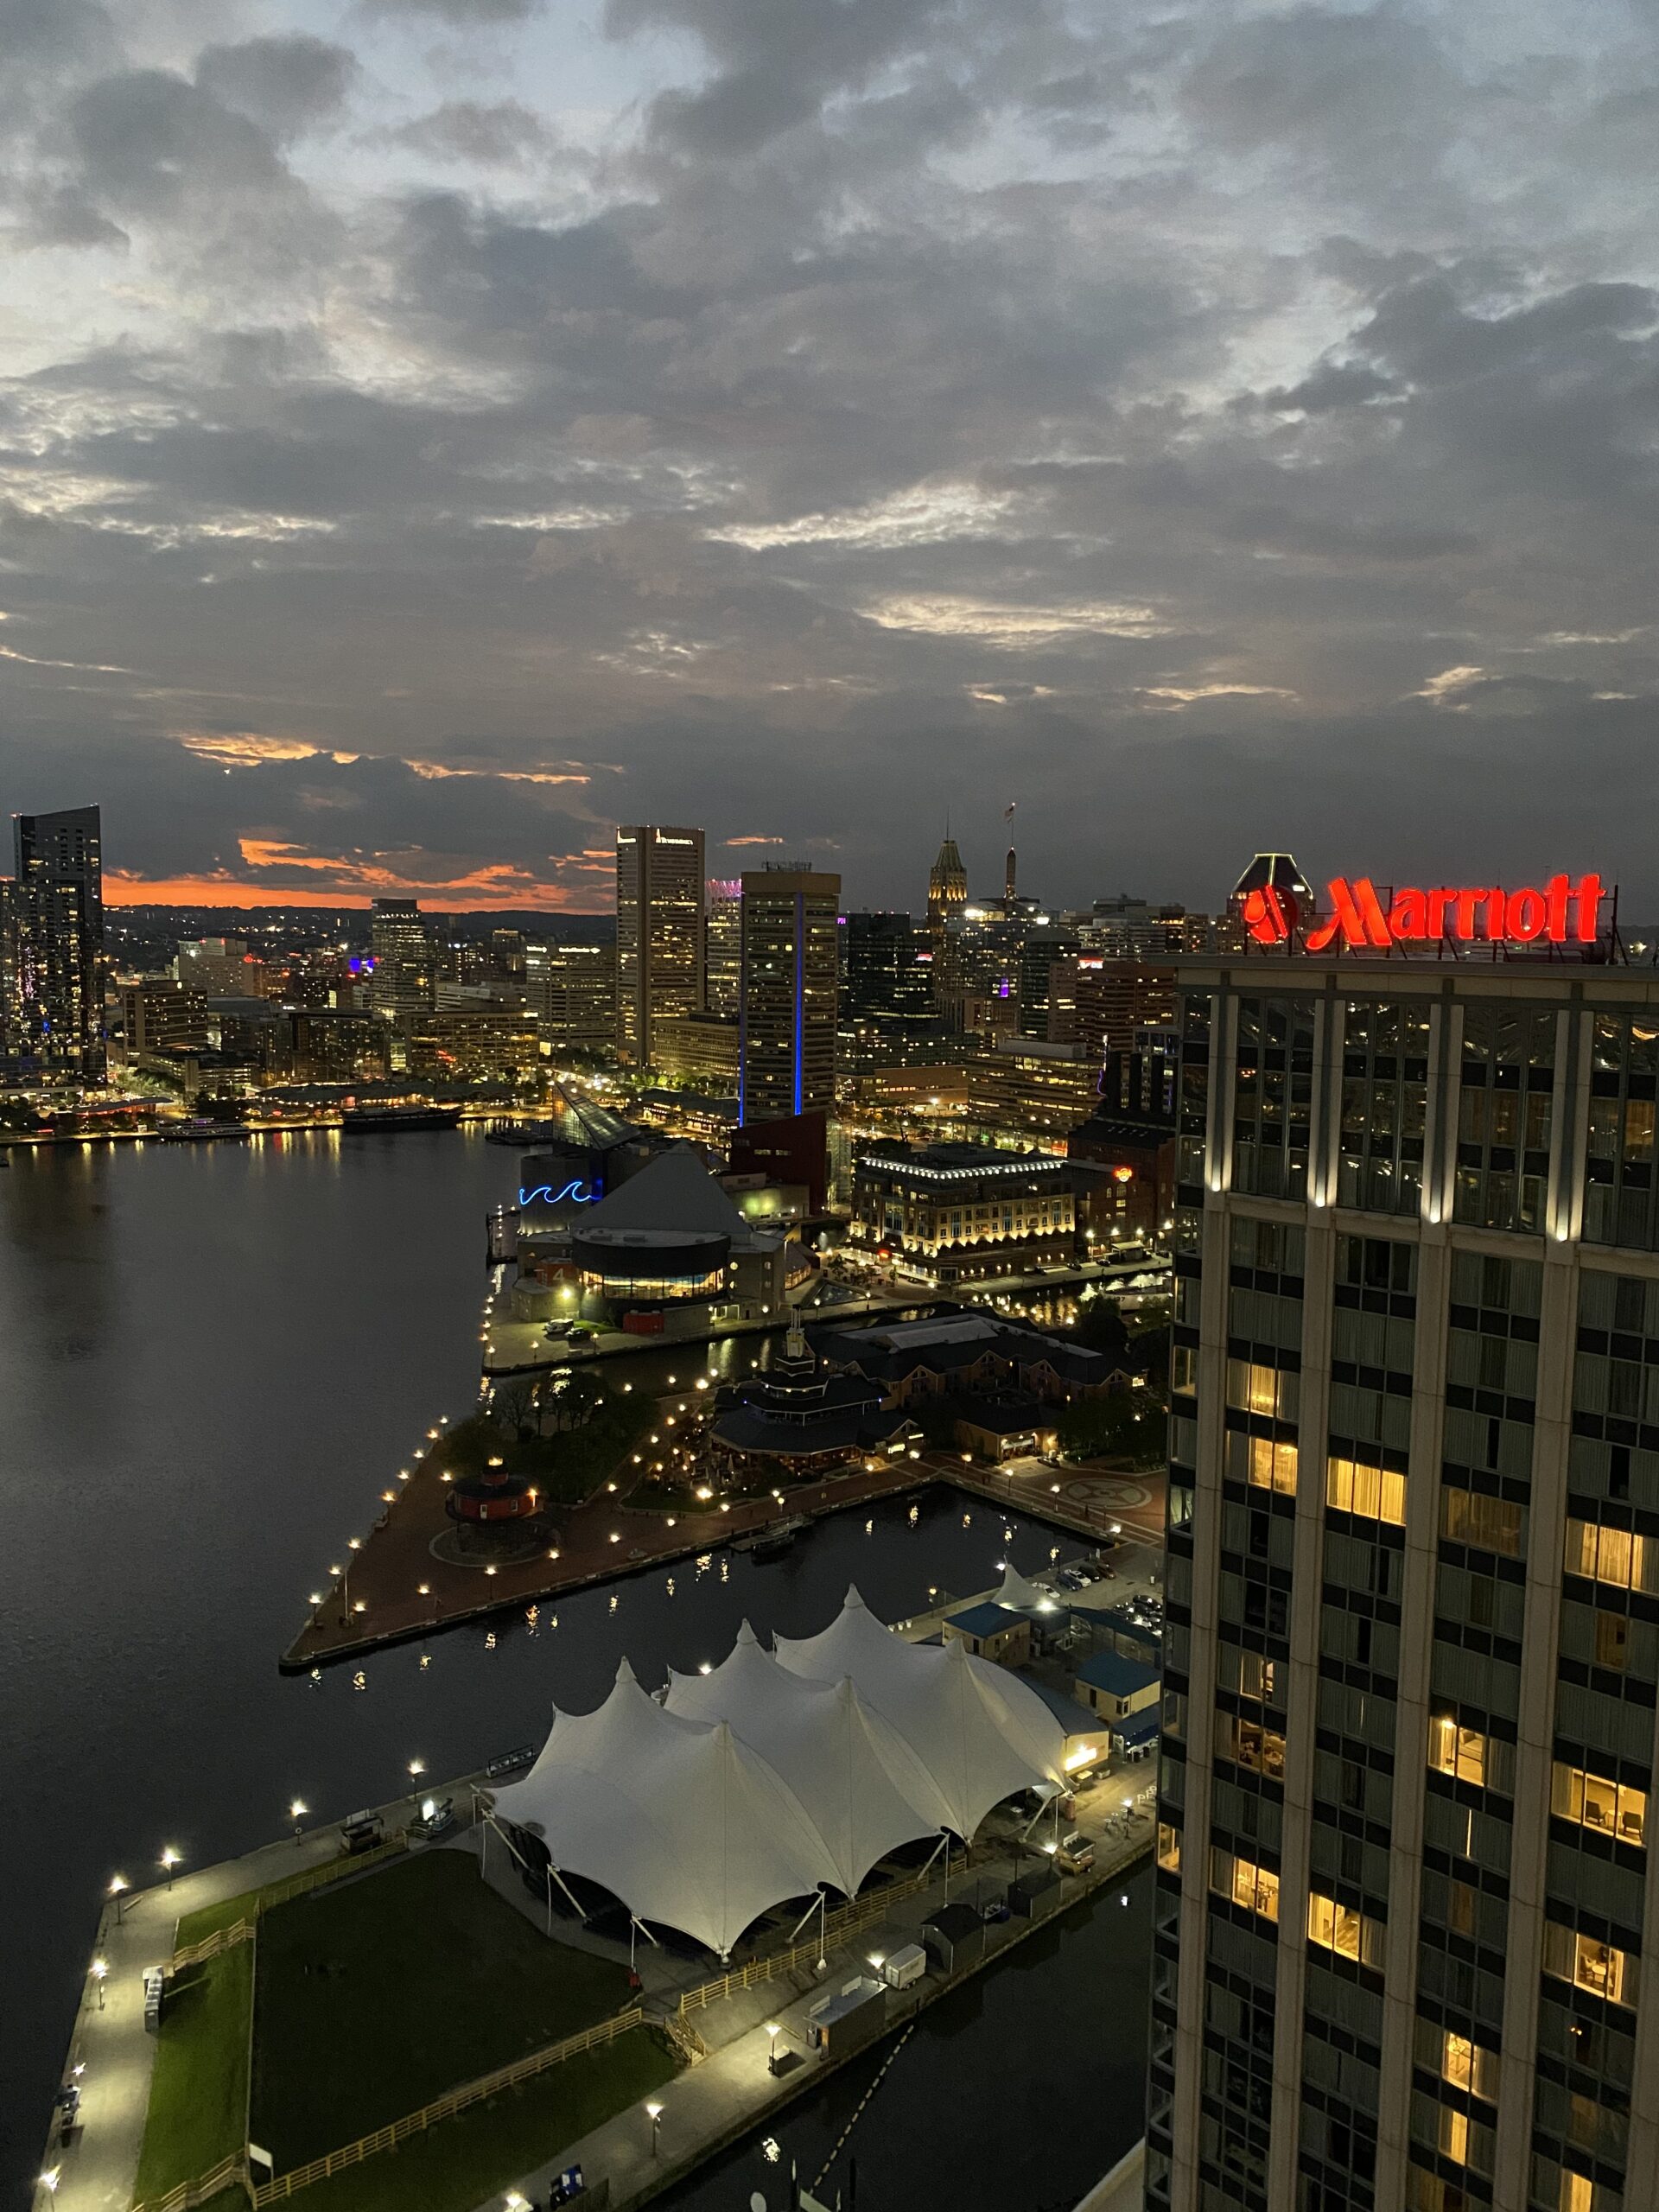 View of buildings and a harbor at night in Baltimore Maryland.